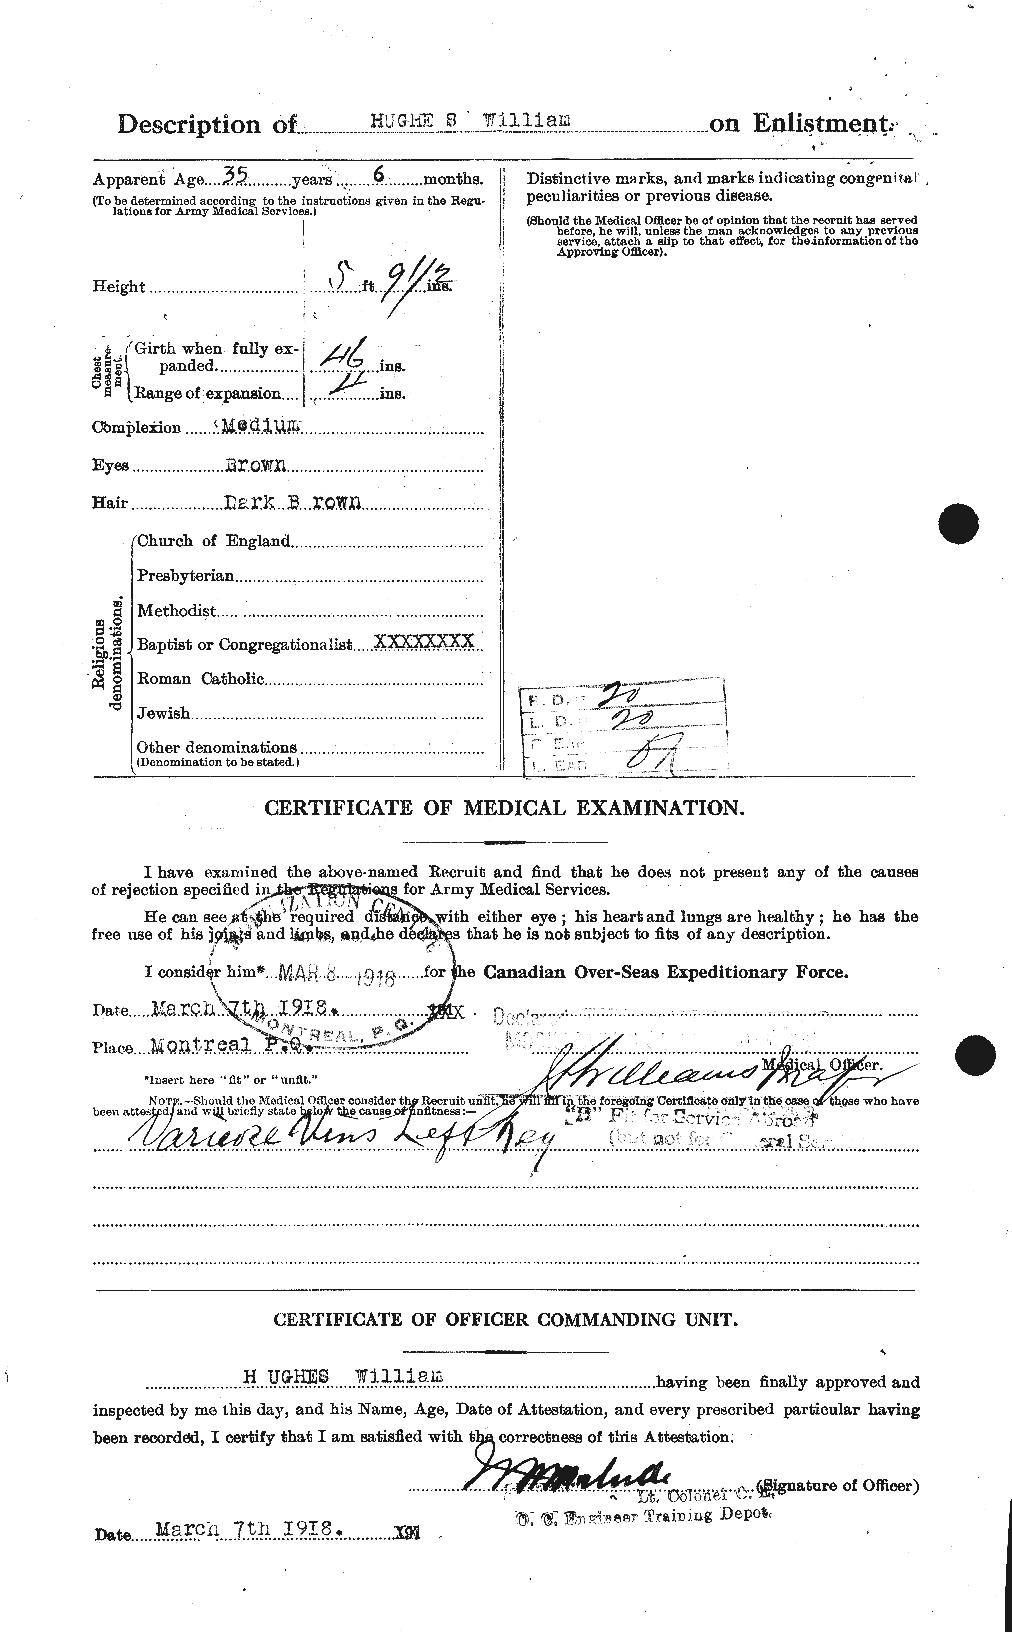 Personnel Records of the First World War - CEF 405889b